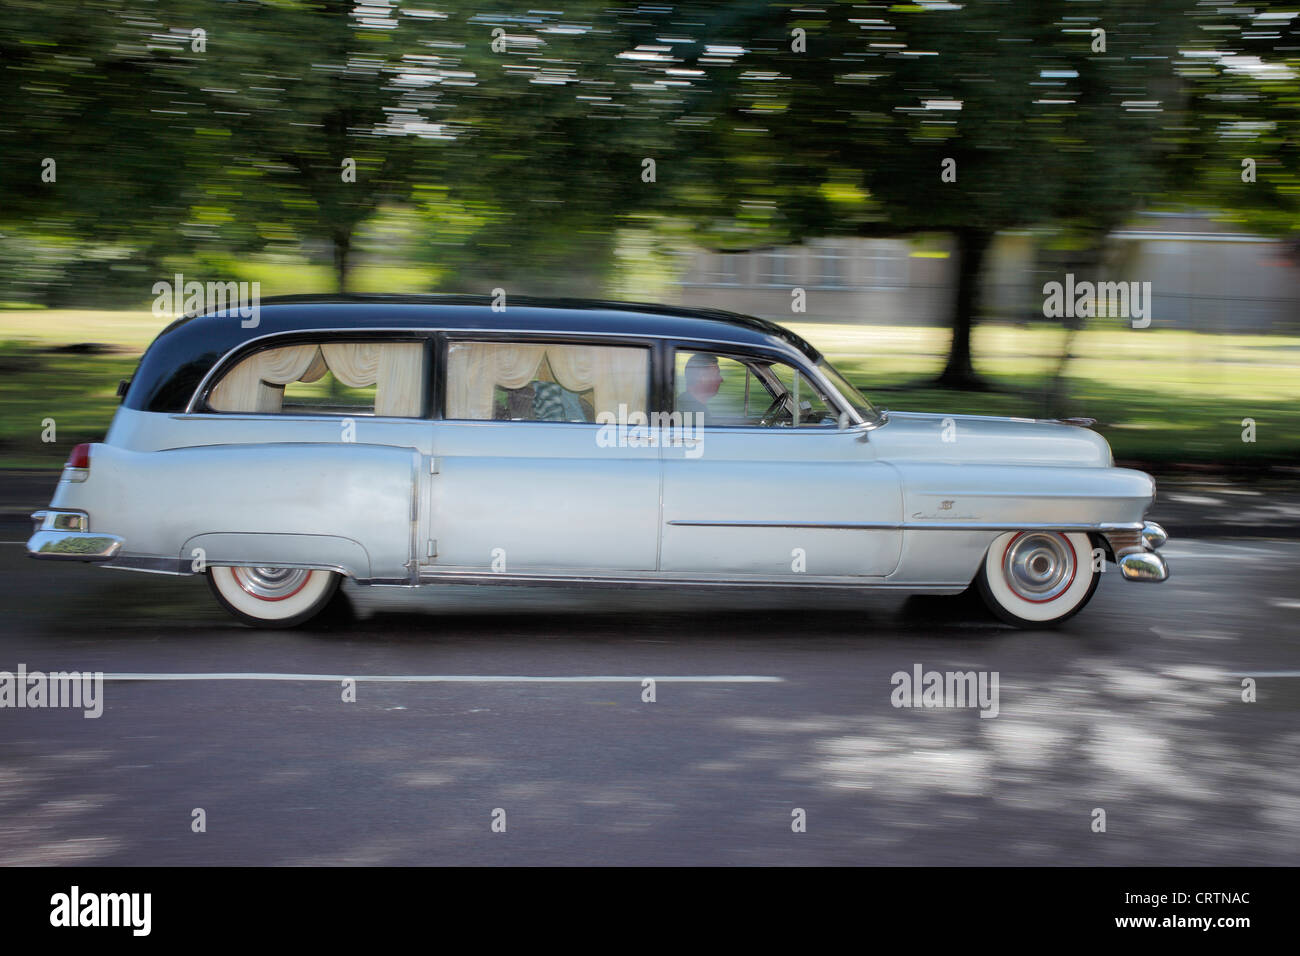 American 1952 Cadillac hearse traveling at speed. Stock Photo